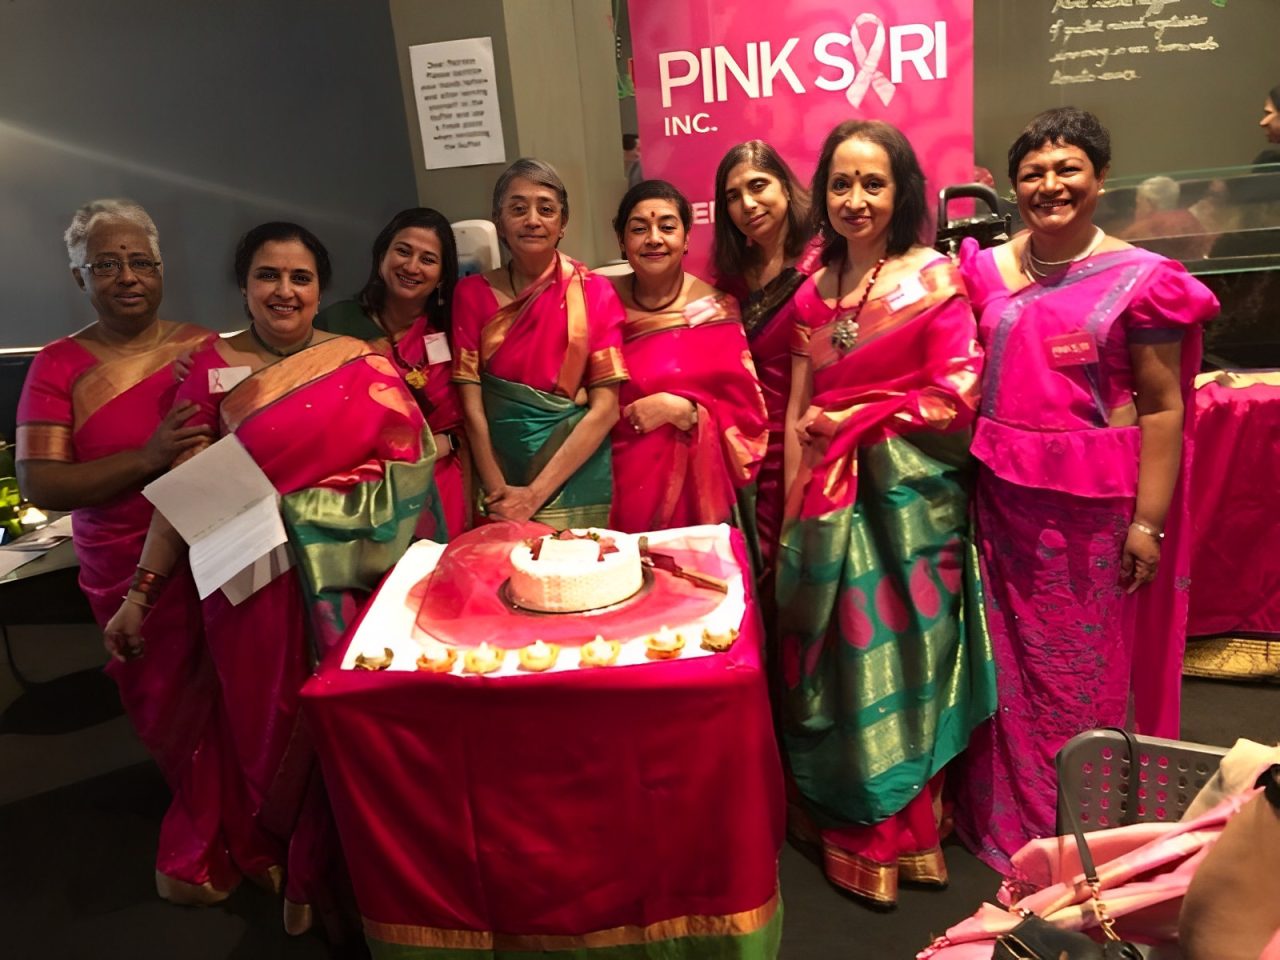 Pink Sari Inc is run by a dynamo of female community leaders from diverse language groups from the Indian sub-continent – Tracey O’Brien